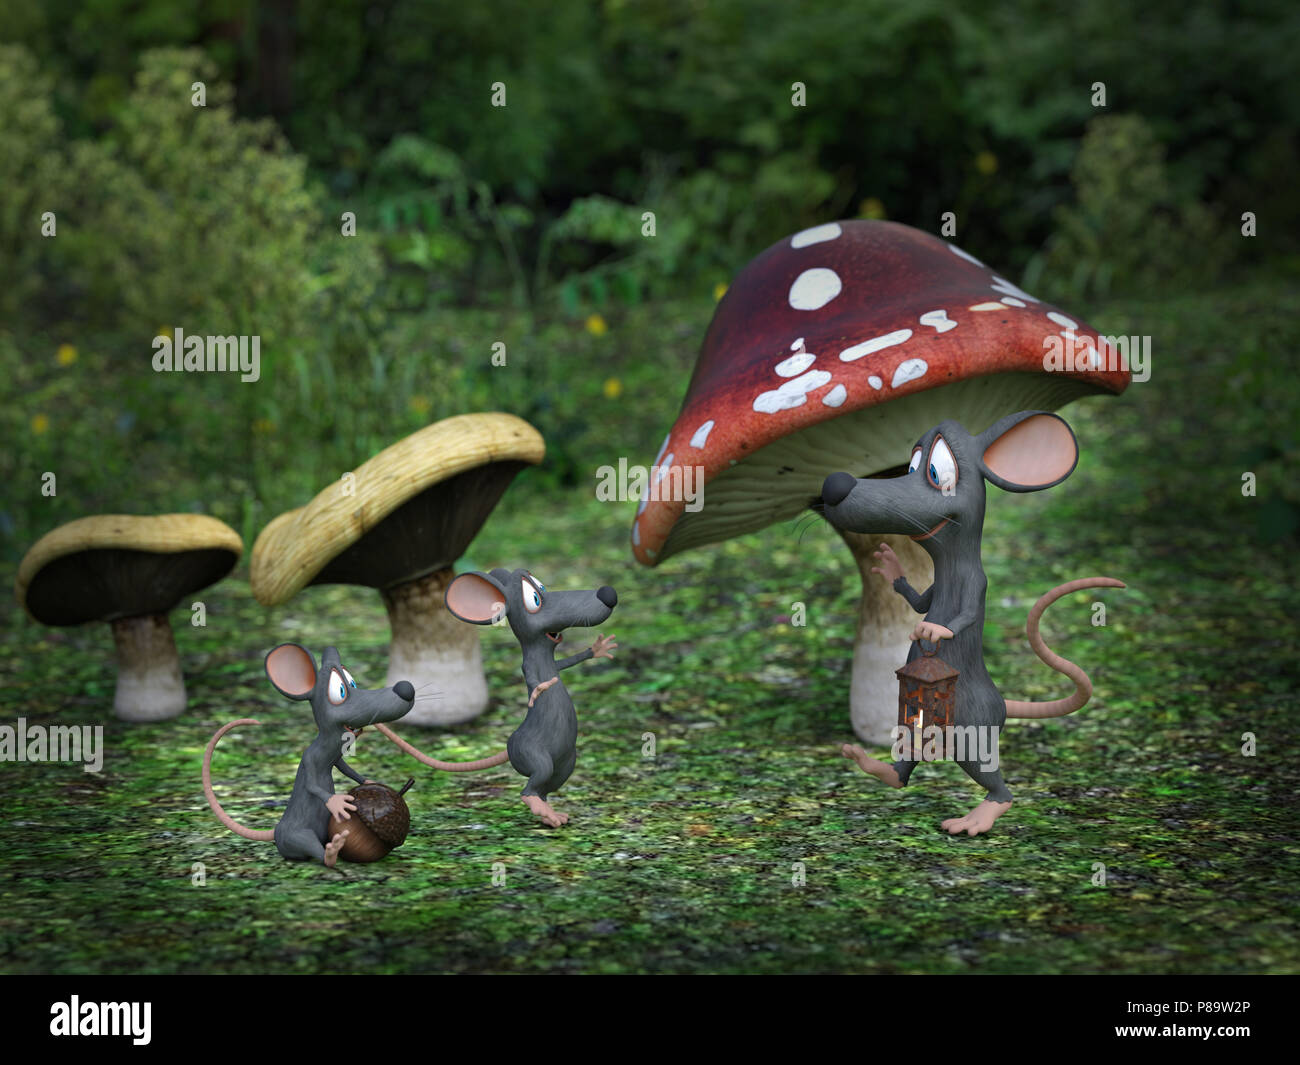 Like a Fairy Tale Forest Cute Toadstool/Lucky/Good Luck to stick 